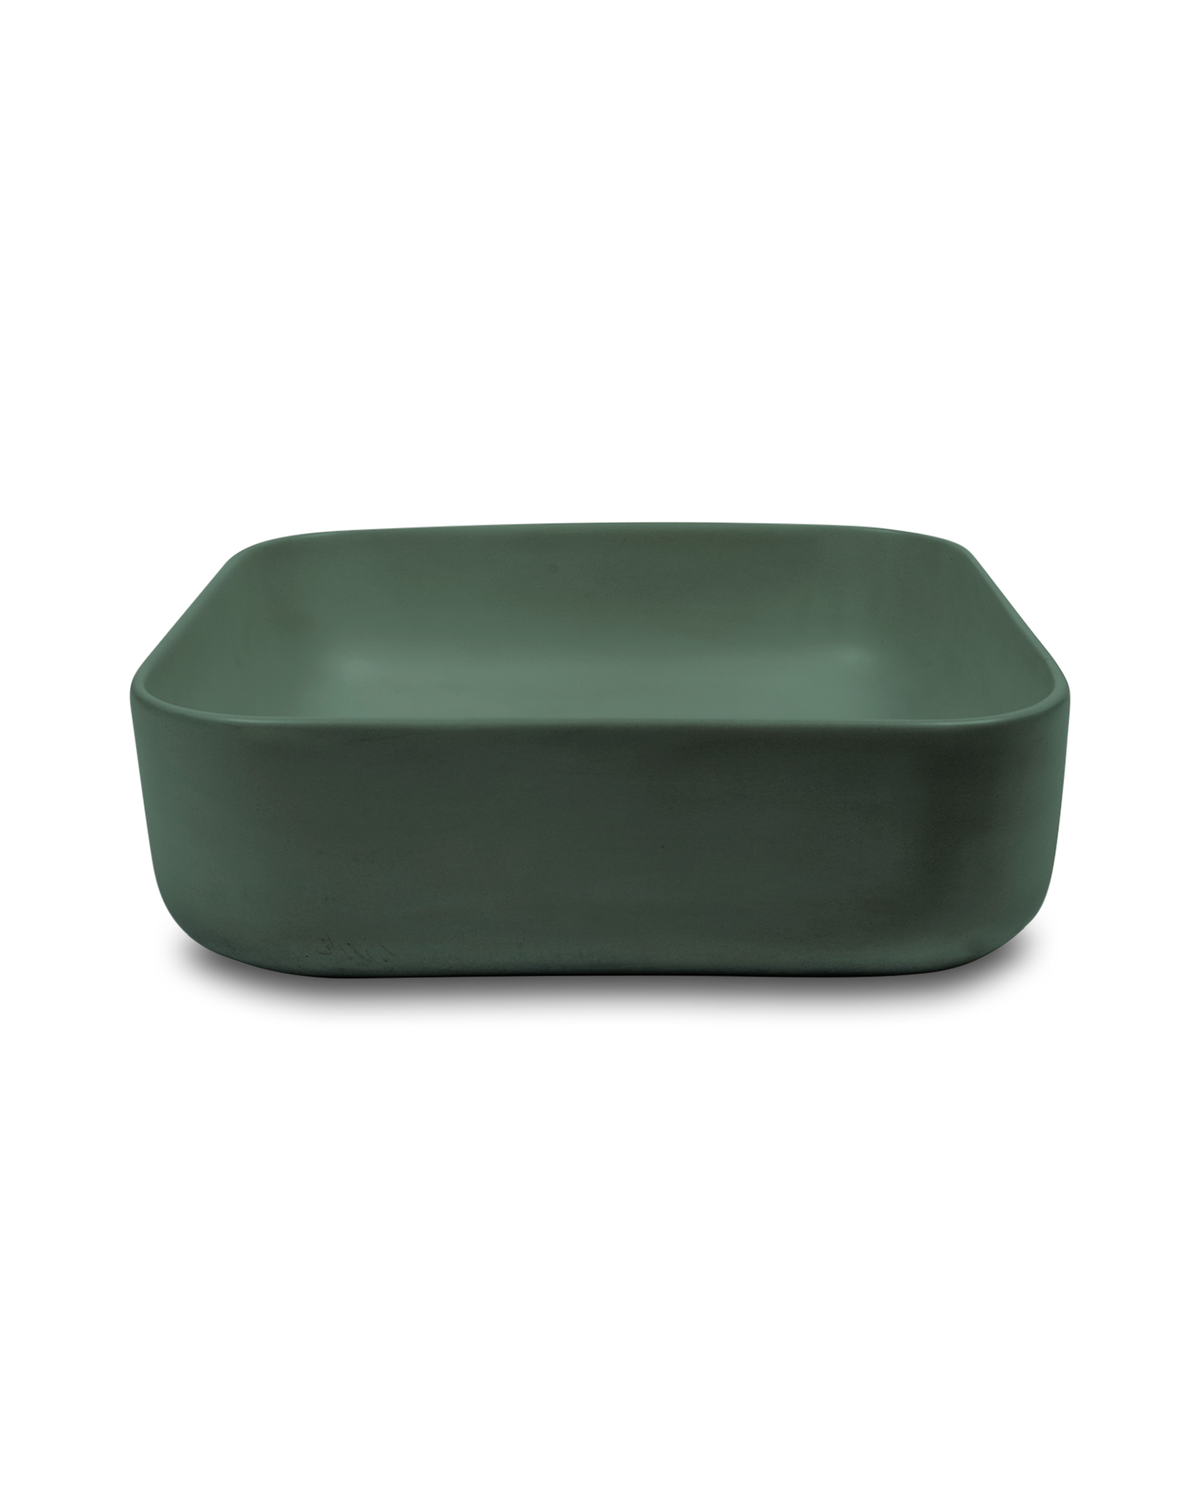 Cube Basin - Surface Mount (Teal)